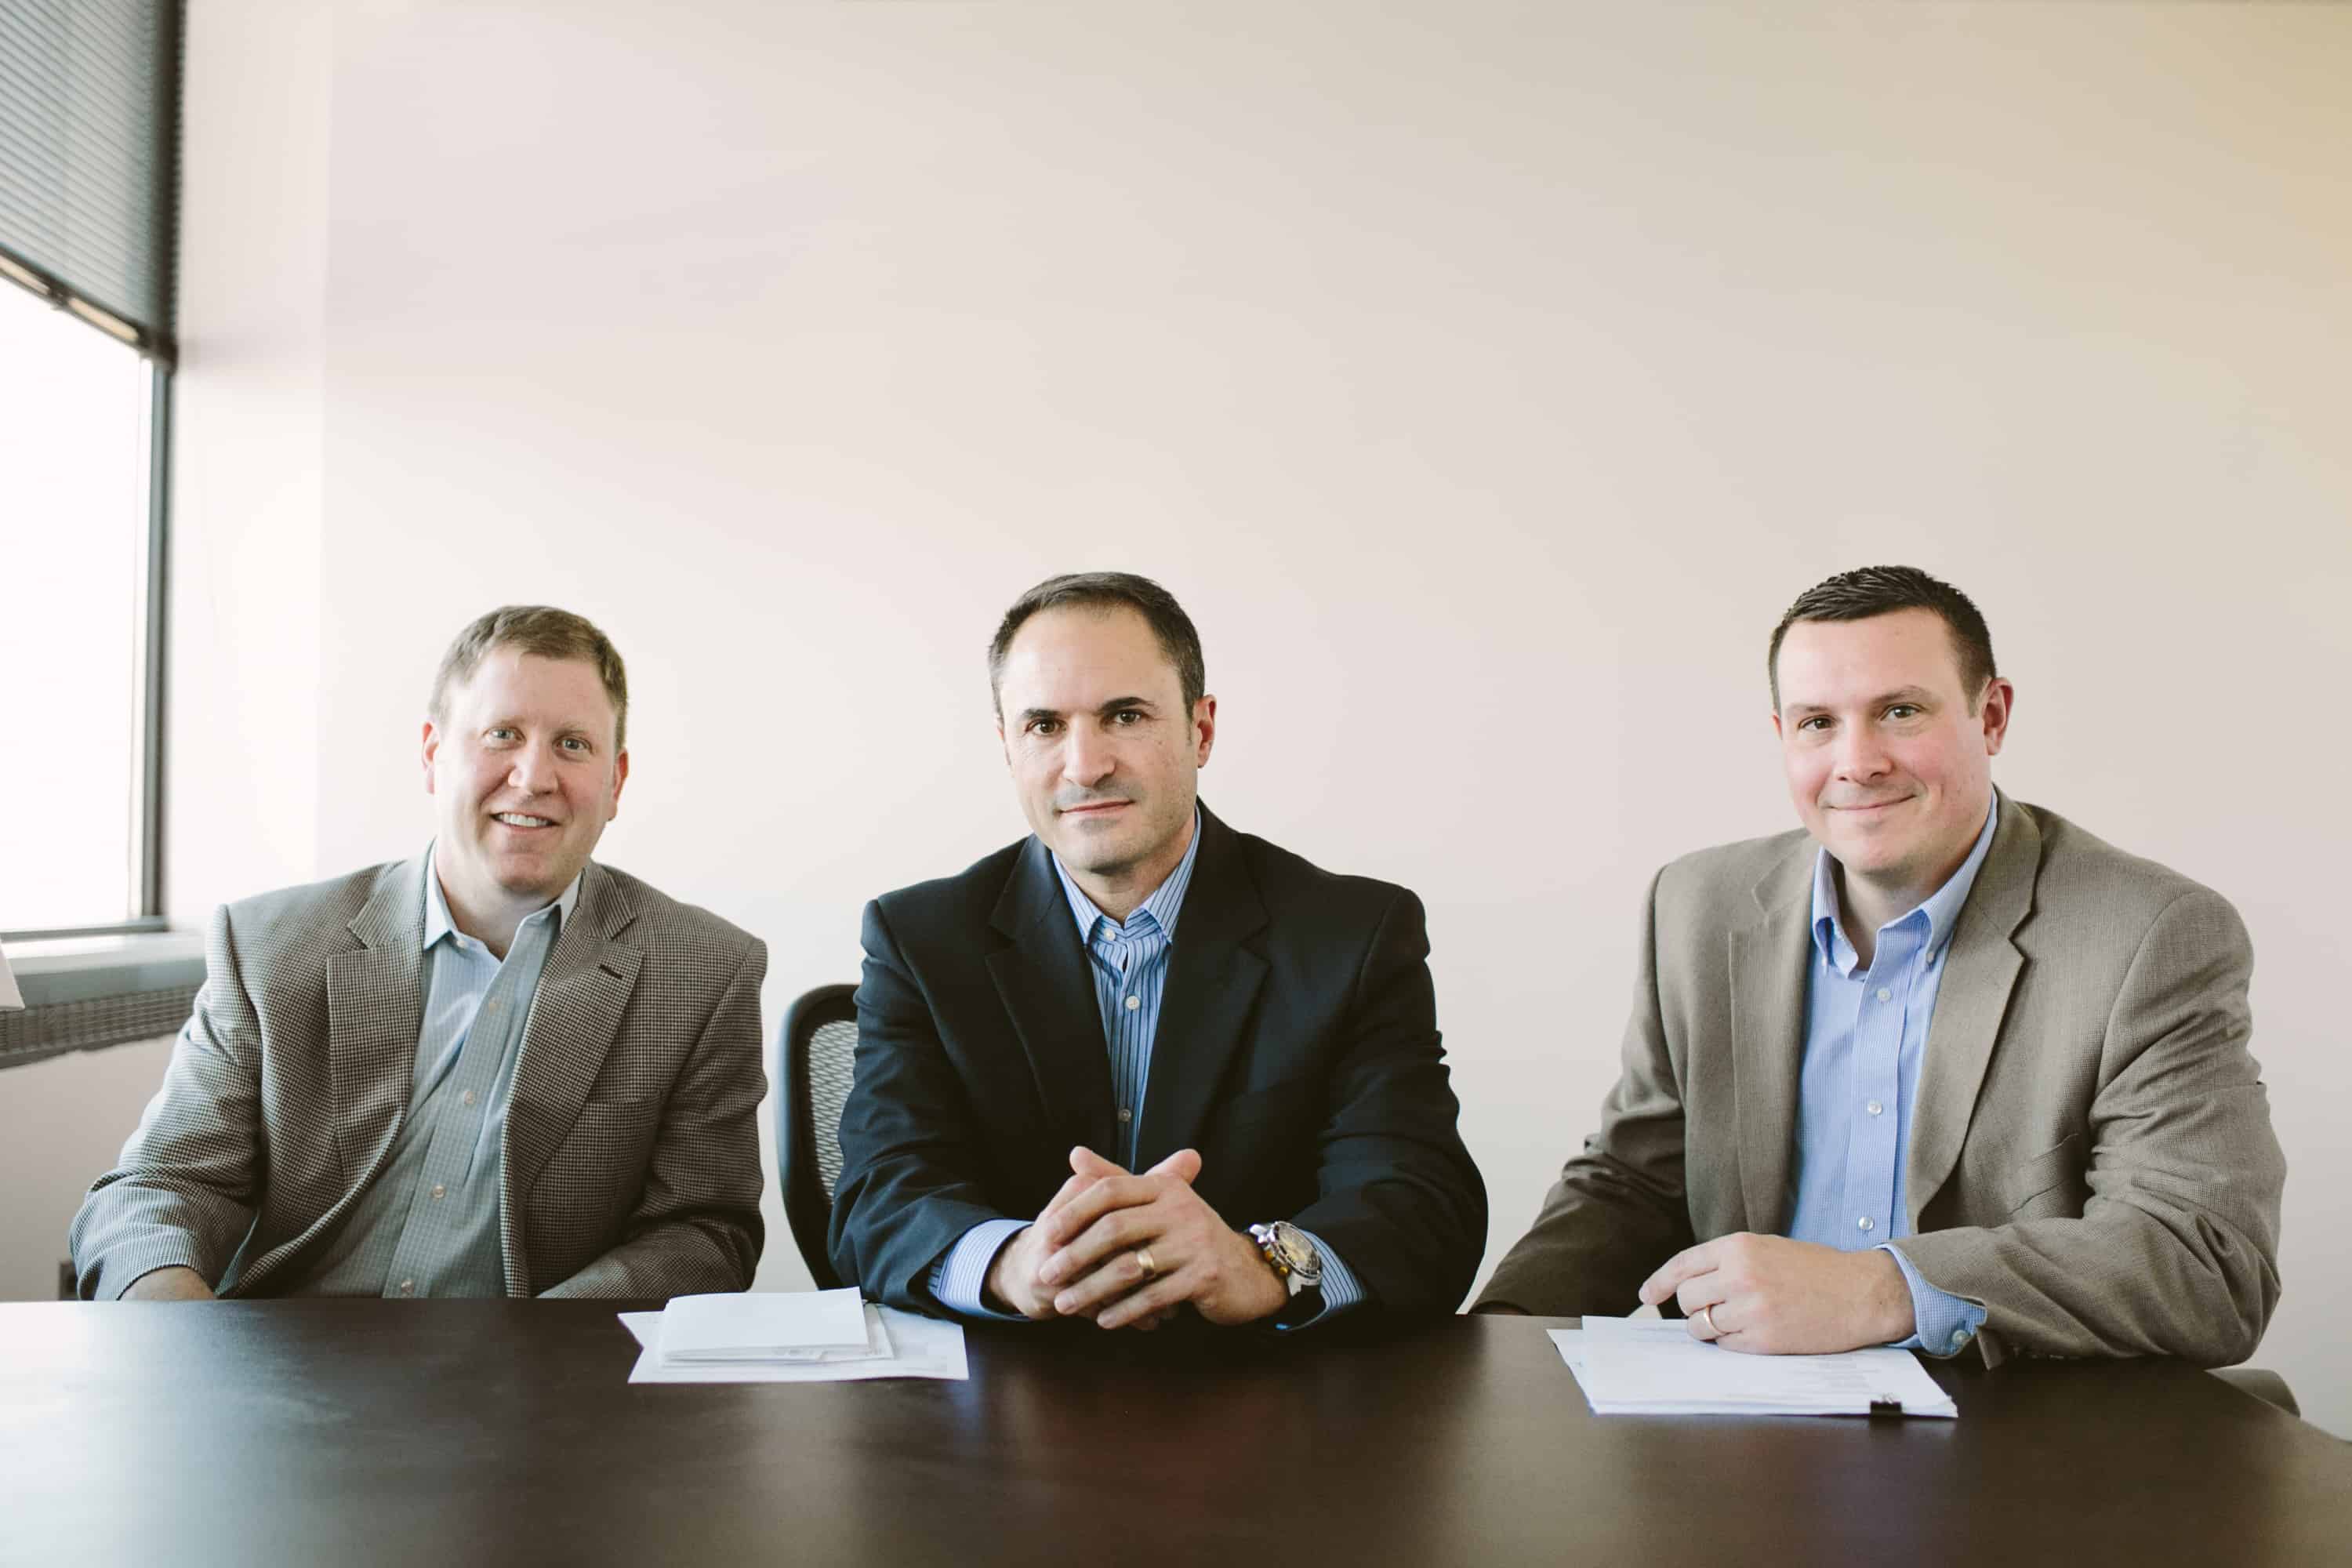 Kermit’s cofounders, from left to right: John Owens, Rich Palera, and Jason Smith.